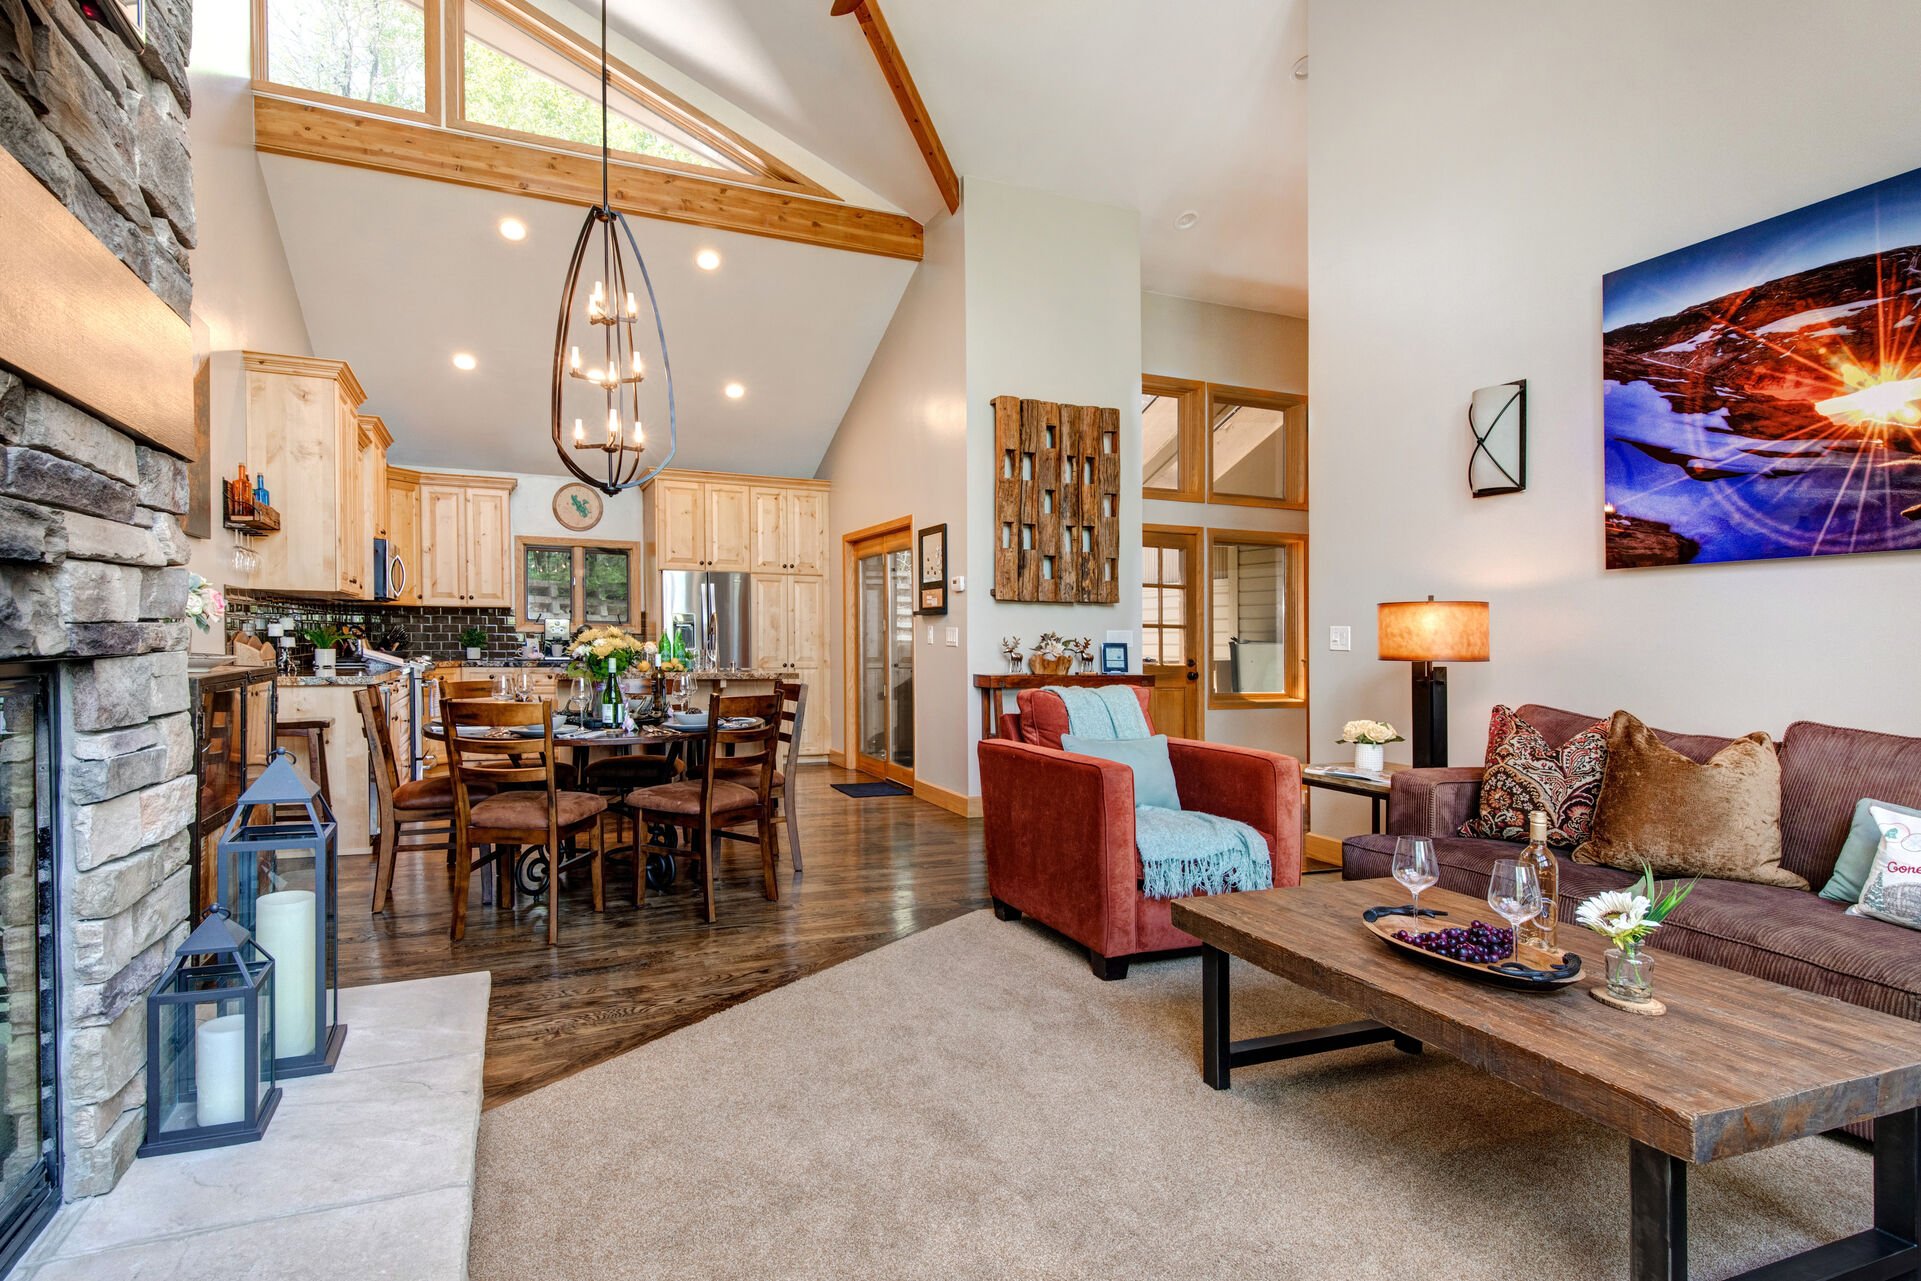 Living Room with plush furnishings, wood-burning fireplace, smart TV, and private deck access